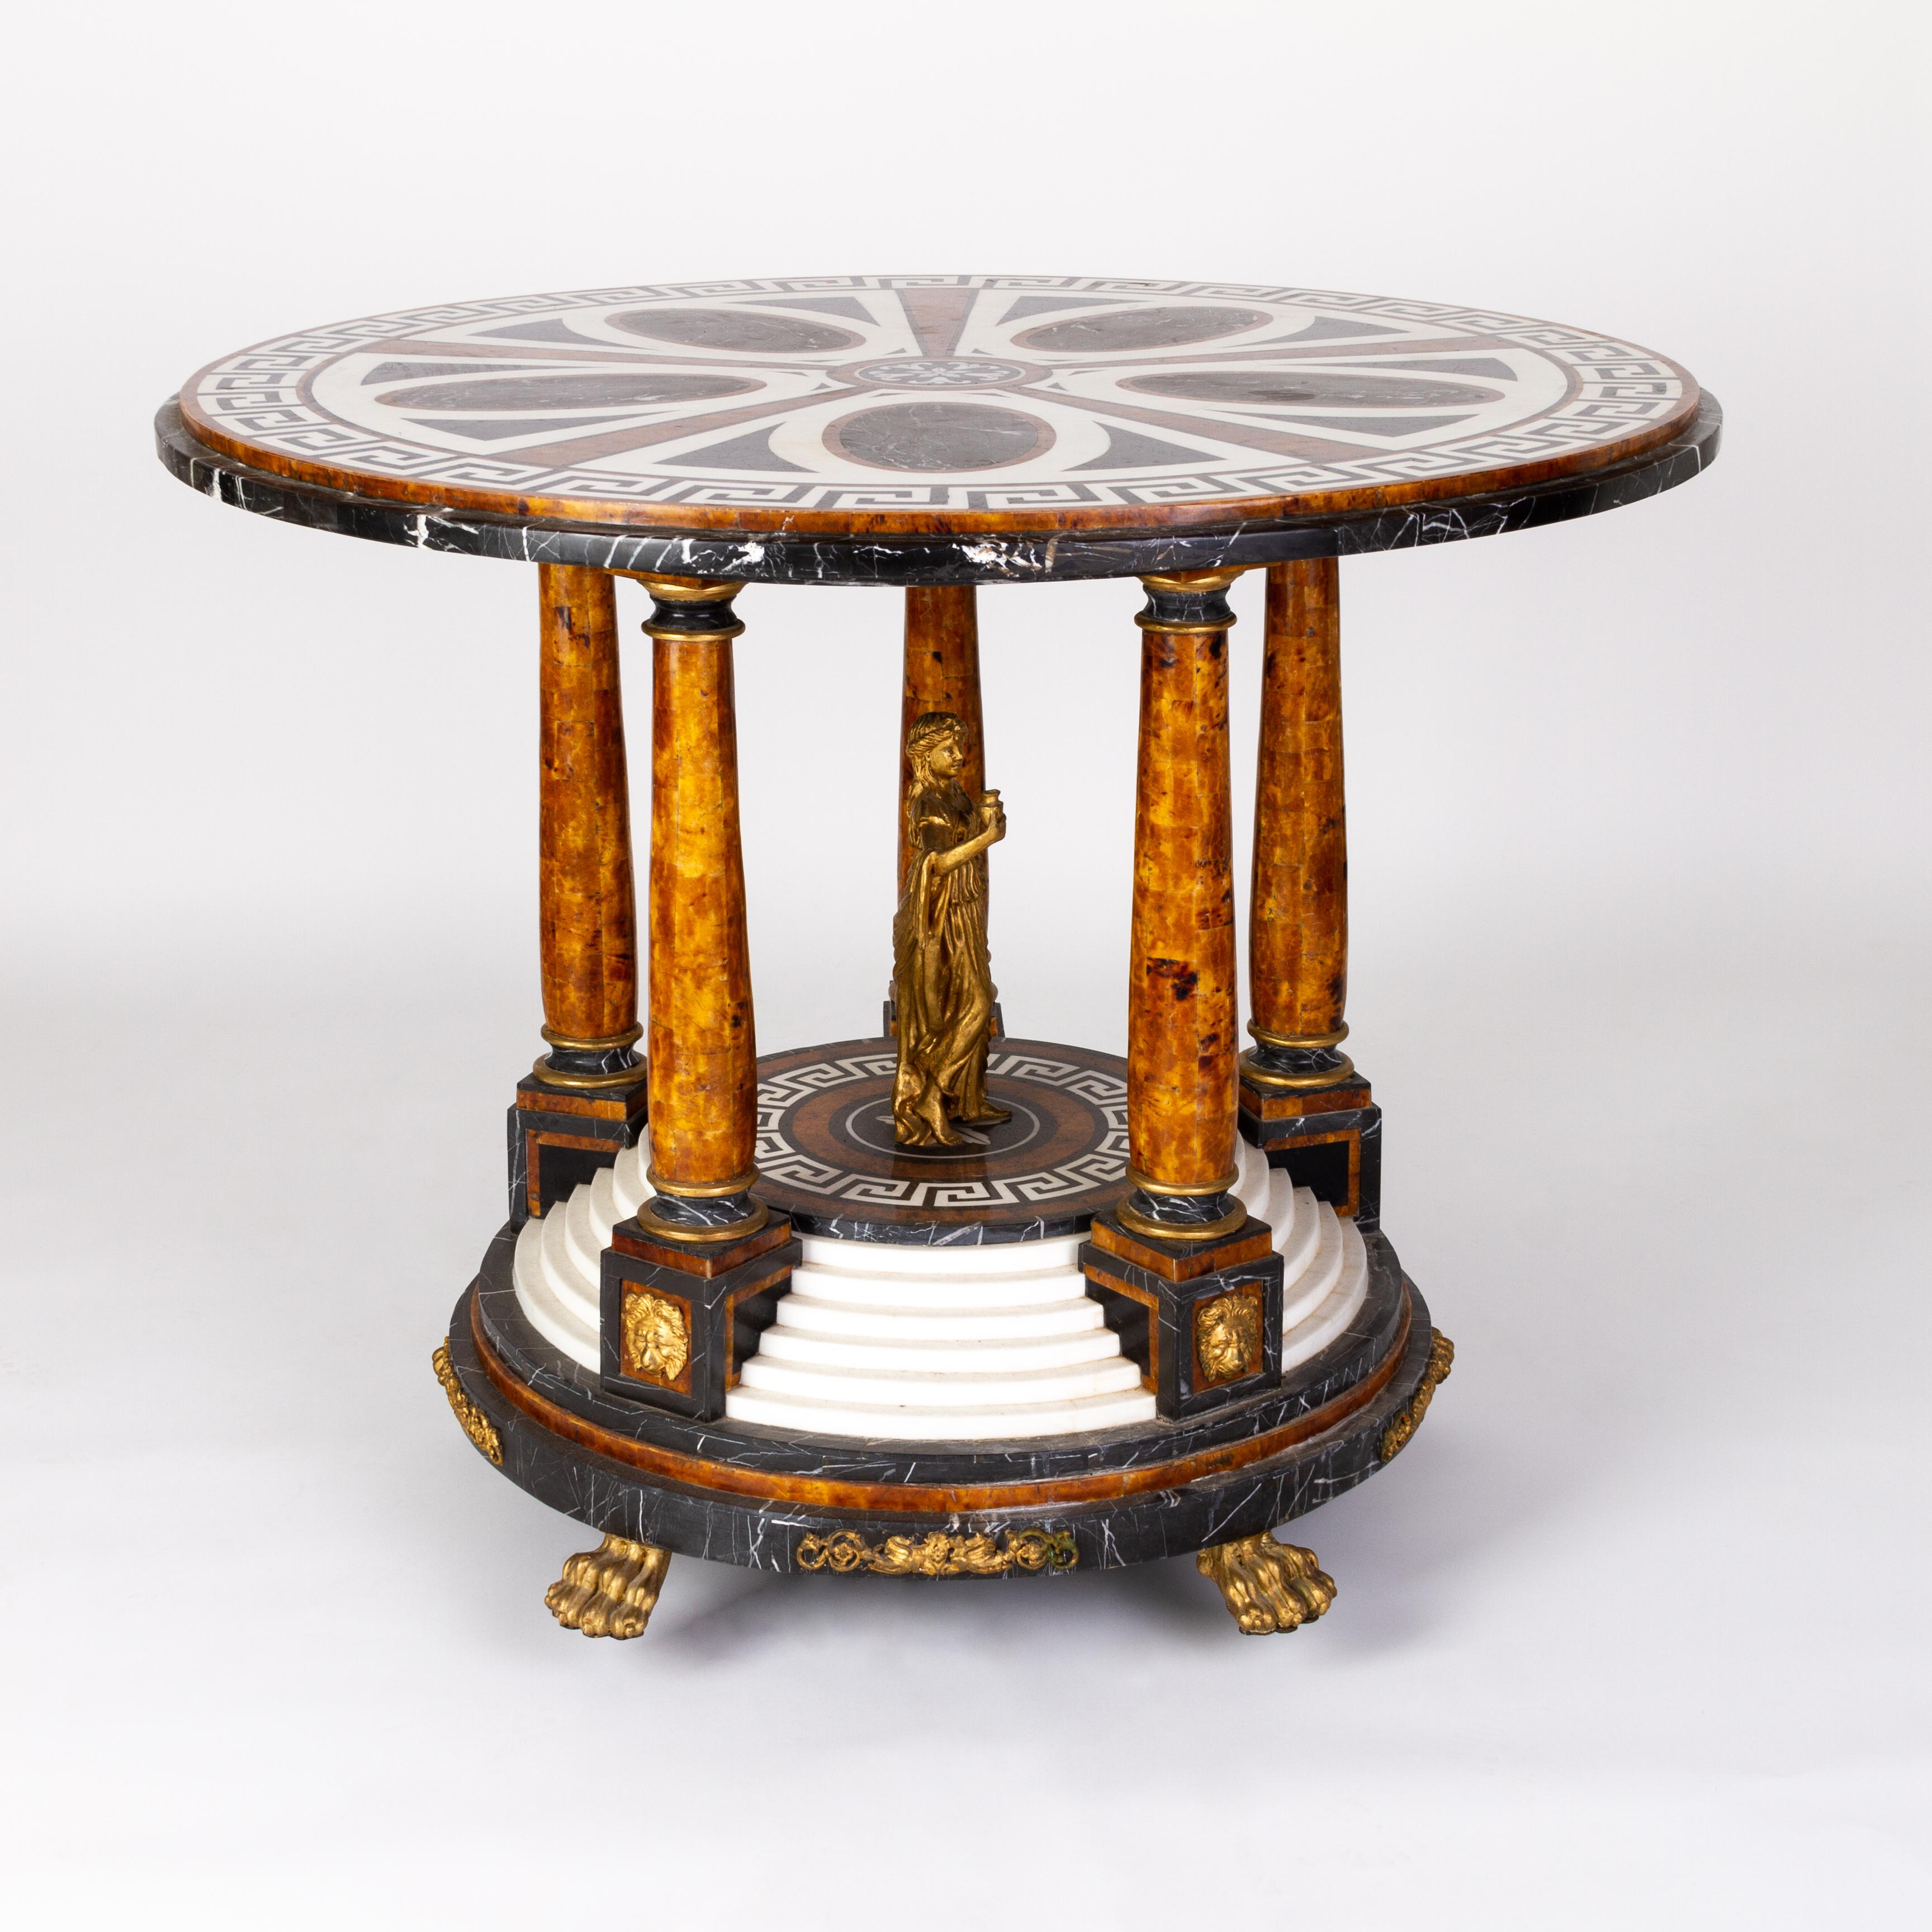 Impressive Empire Italian Pietra Dura Ormolu Exotic Marble Grecian Style Table 
Good condition.
A remarkable late 19th century Empire-revival table. The exotic marble top and base inlaid in Greek keys, decorated with a central robed figure. On burr